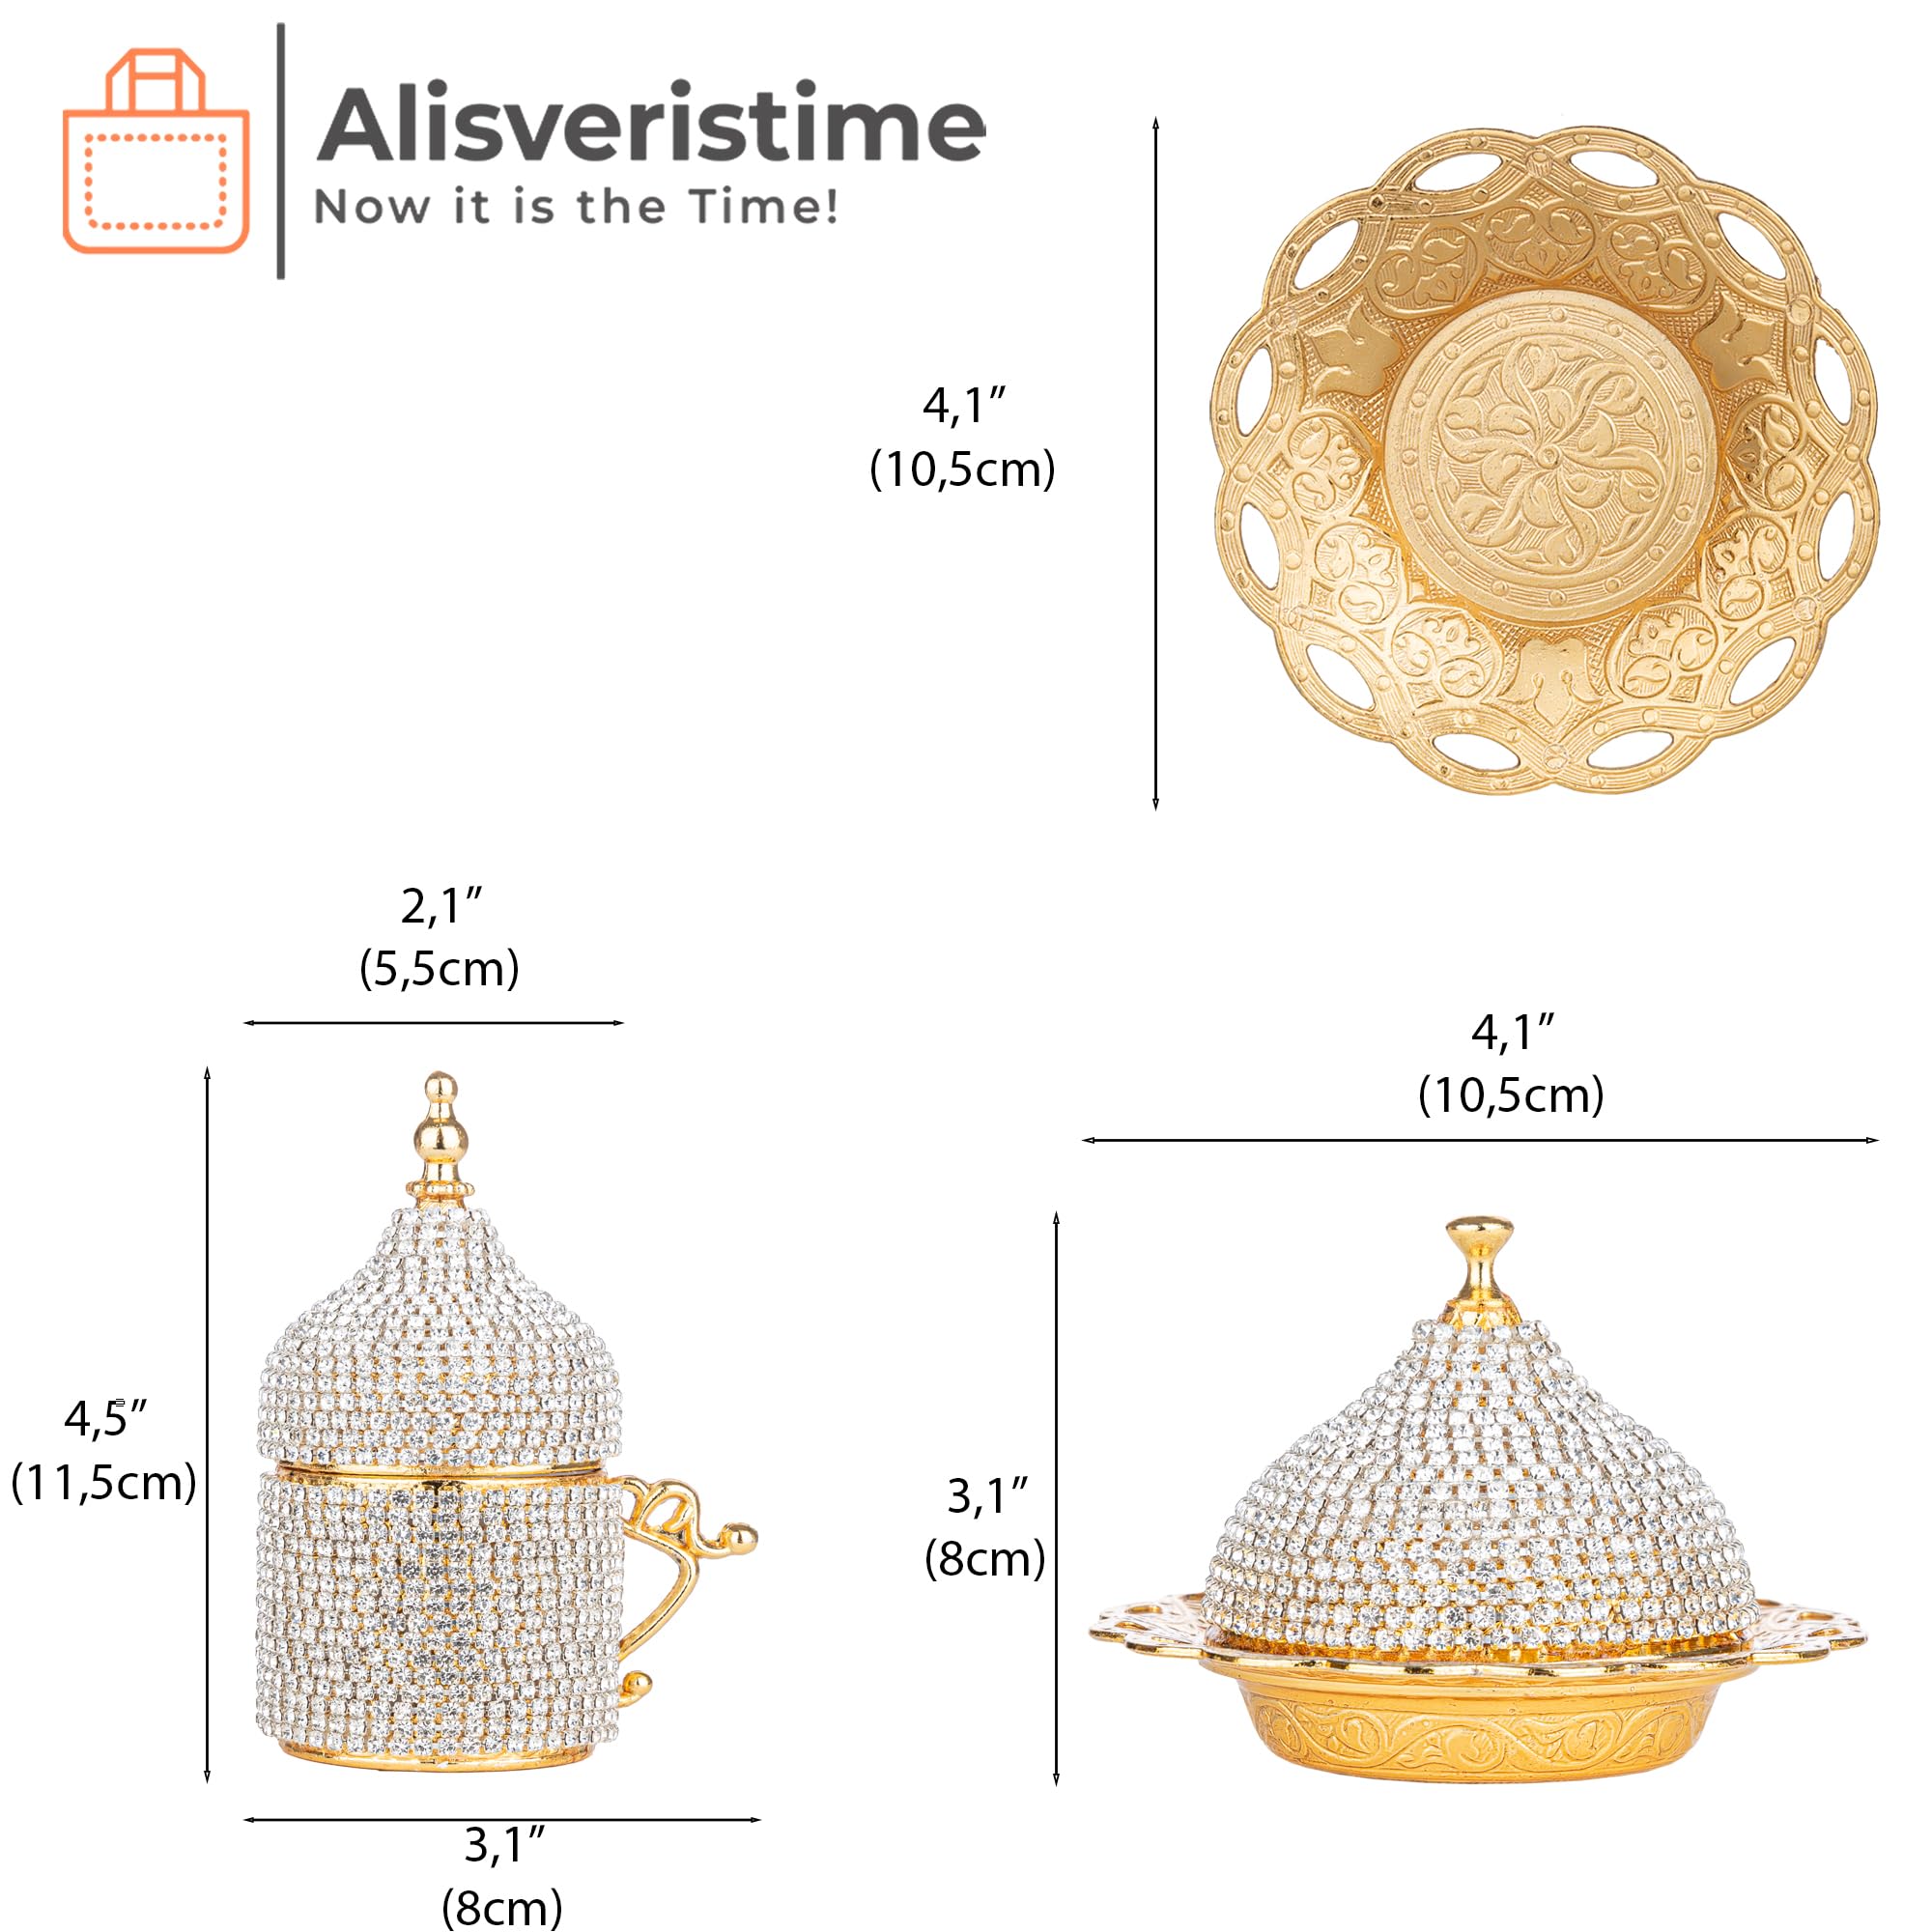 Alisveristime Ottoman Turkish Greek Arabic Espresso Coffee Cups with Saucer and Lid (Crystal Set) (Set of 2) (Gold)